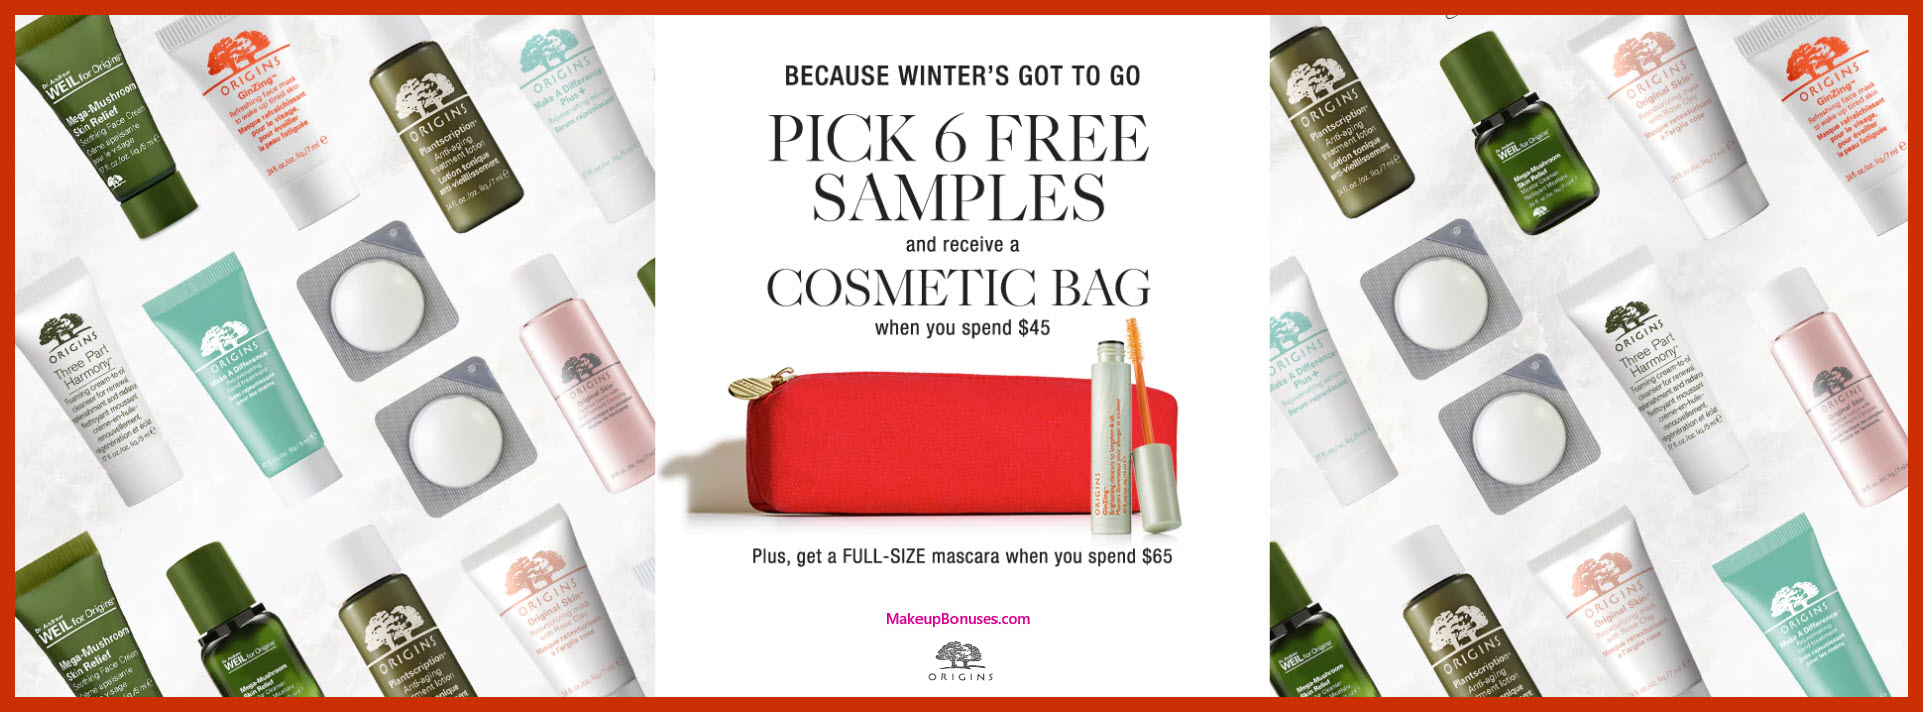 Receive your choice of 7-pc gift with $45 Origins purchase